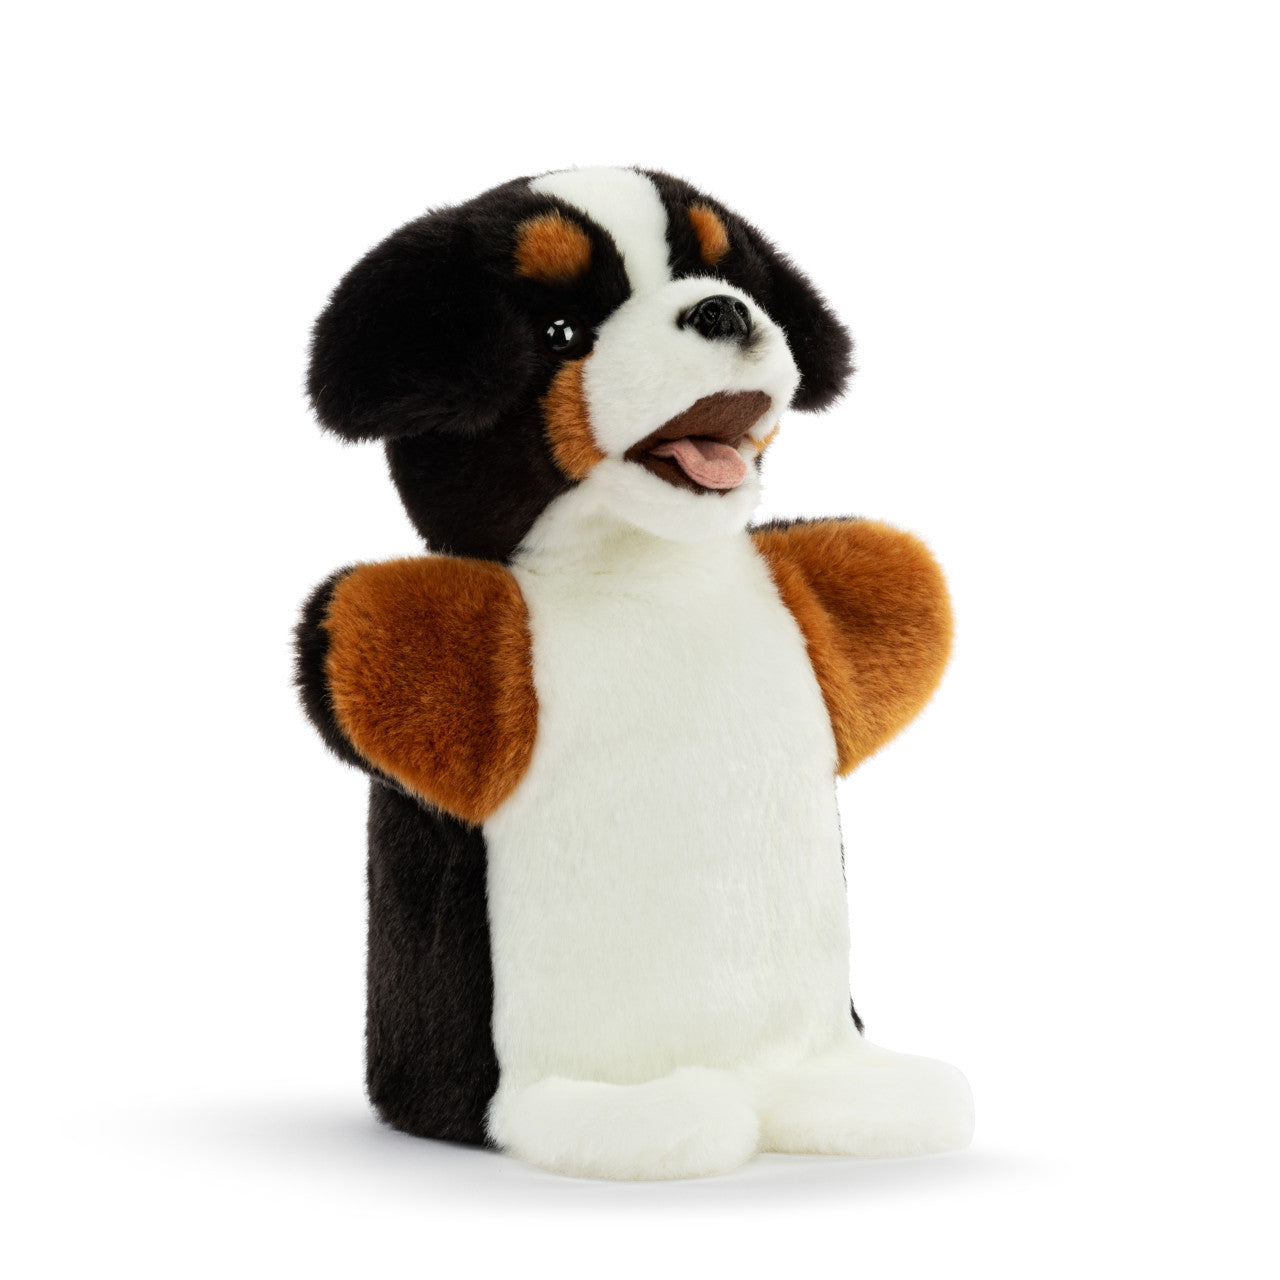 Demdaco Bernese Mountain Dog Puppet available at The Good Life Boutique